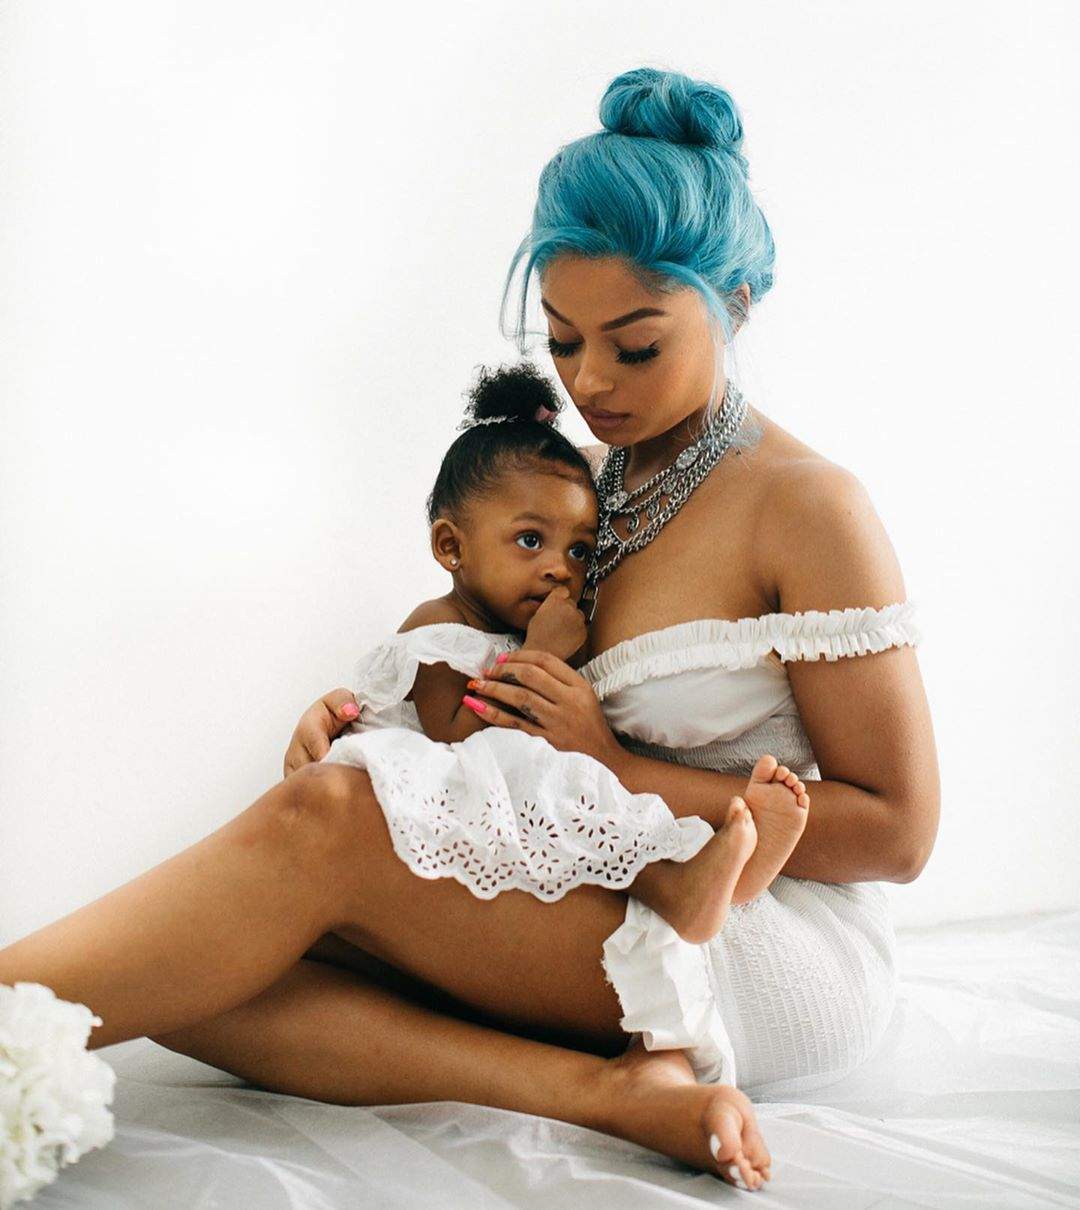 Lola Rae's Birthday Photos Featured A Sweet Surprise